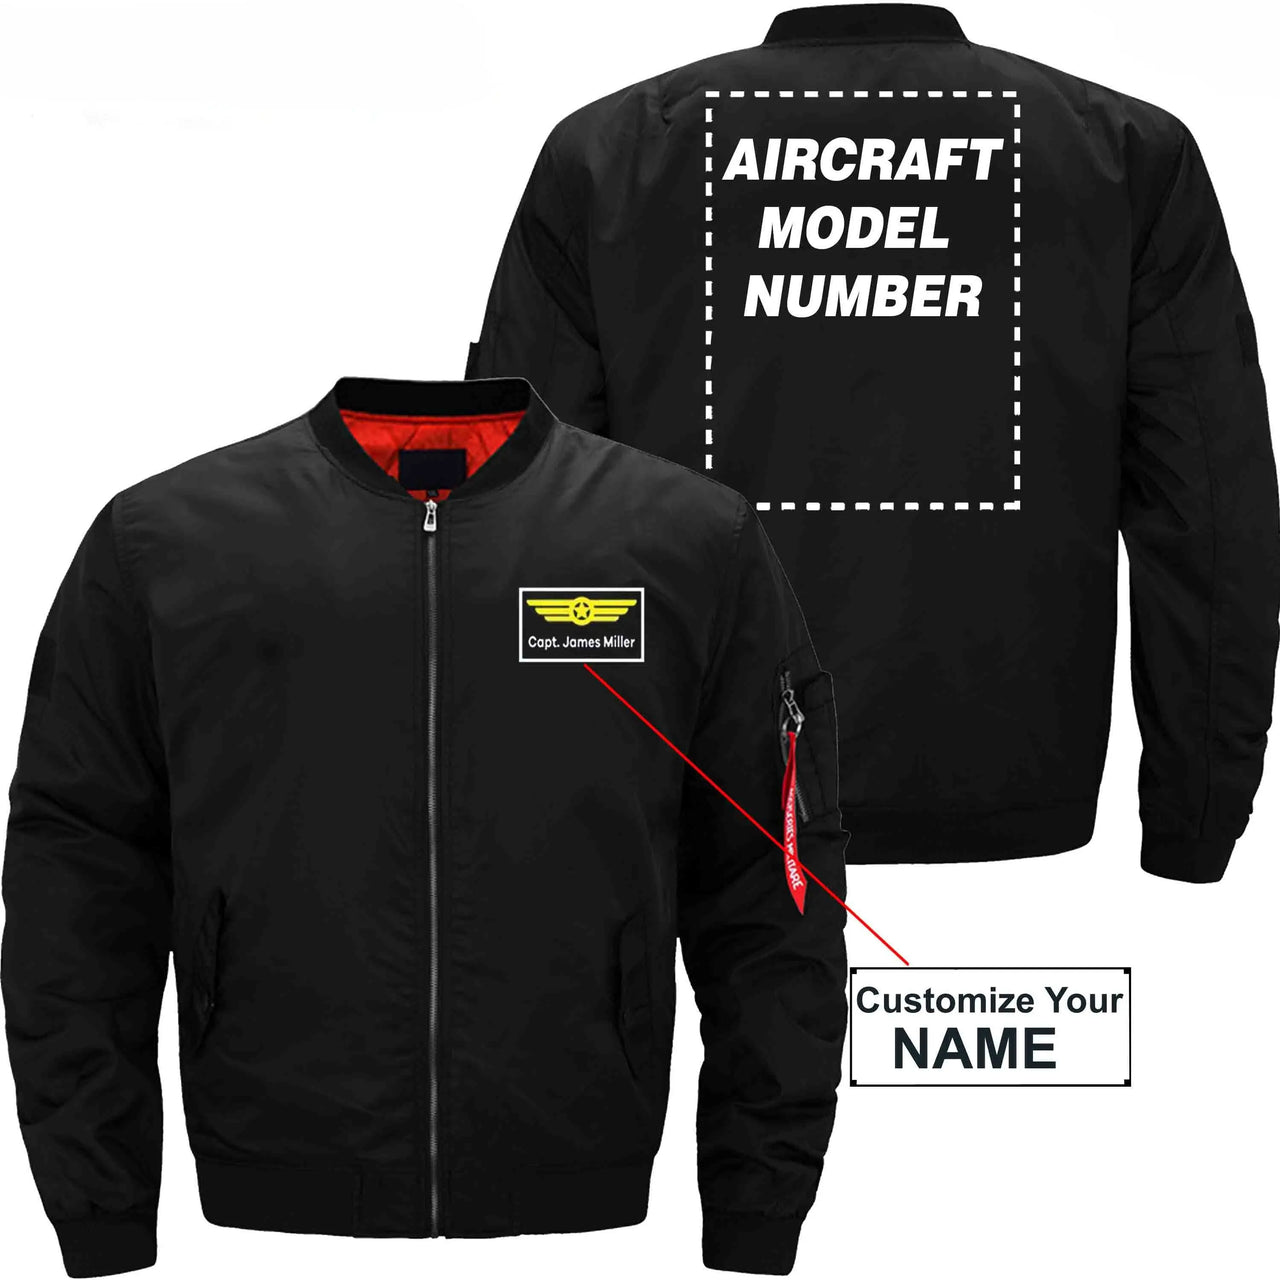 NAME WITH AIRCRAFT MODEL NUMBER - JACKET THE AV8R